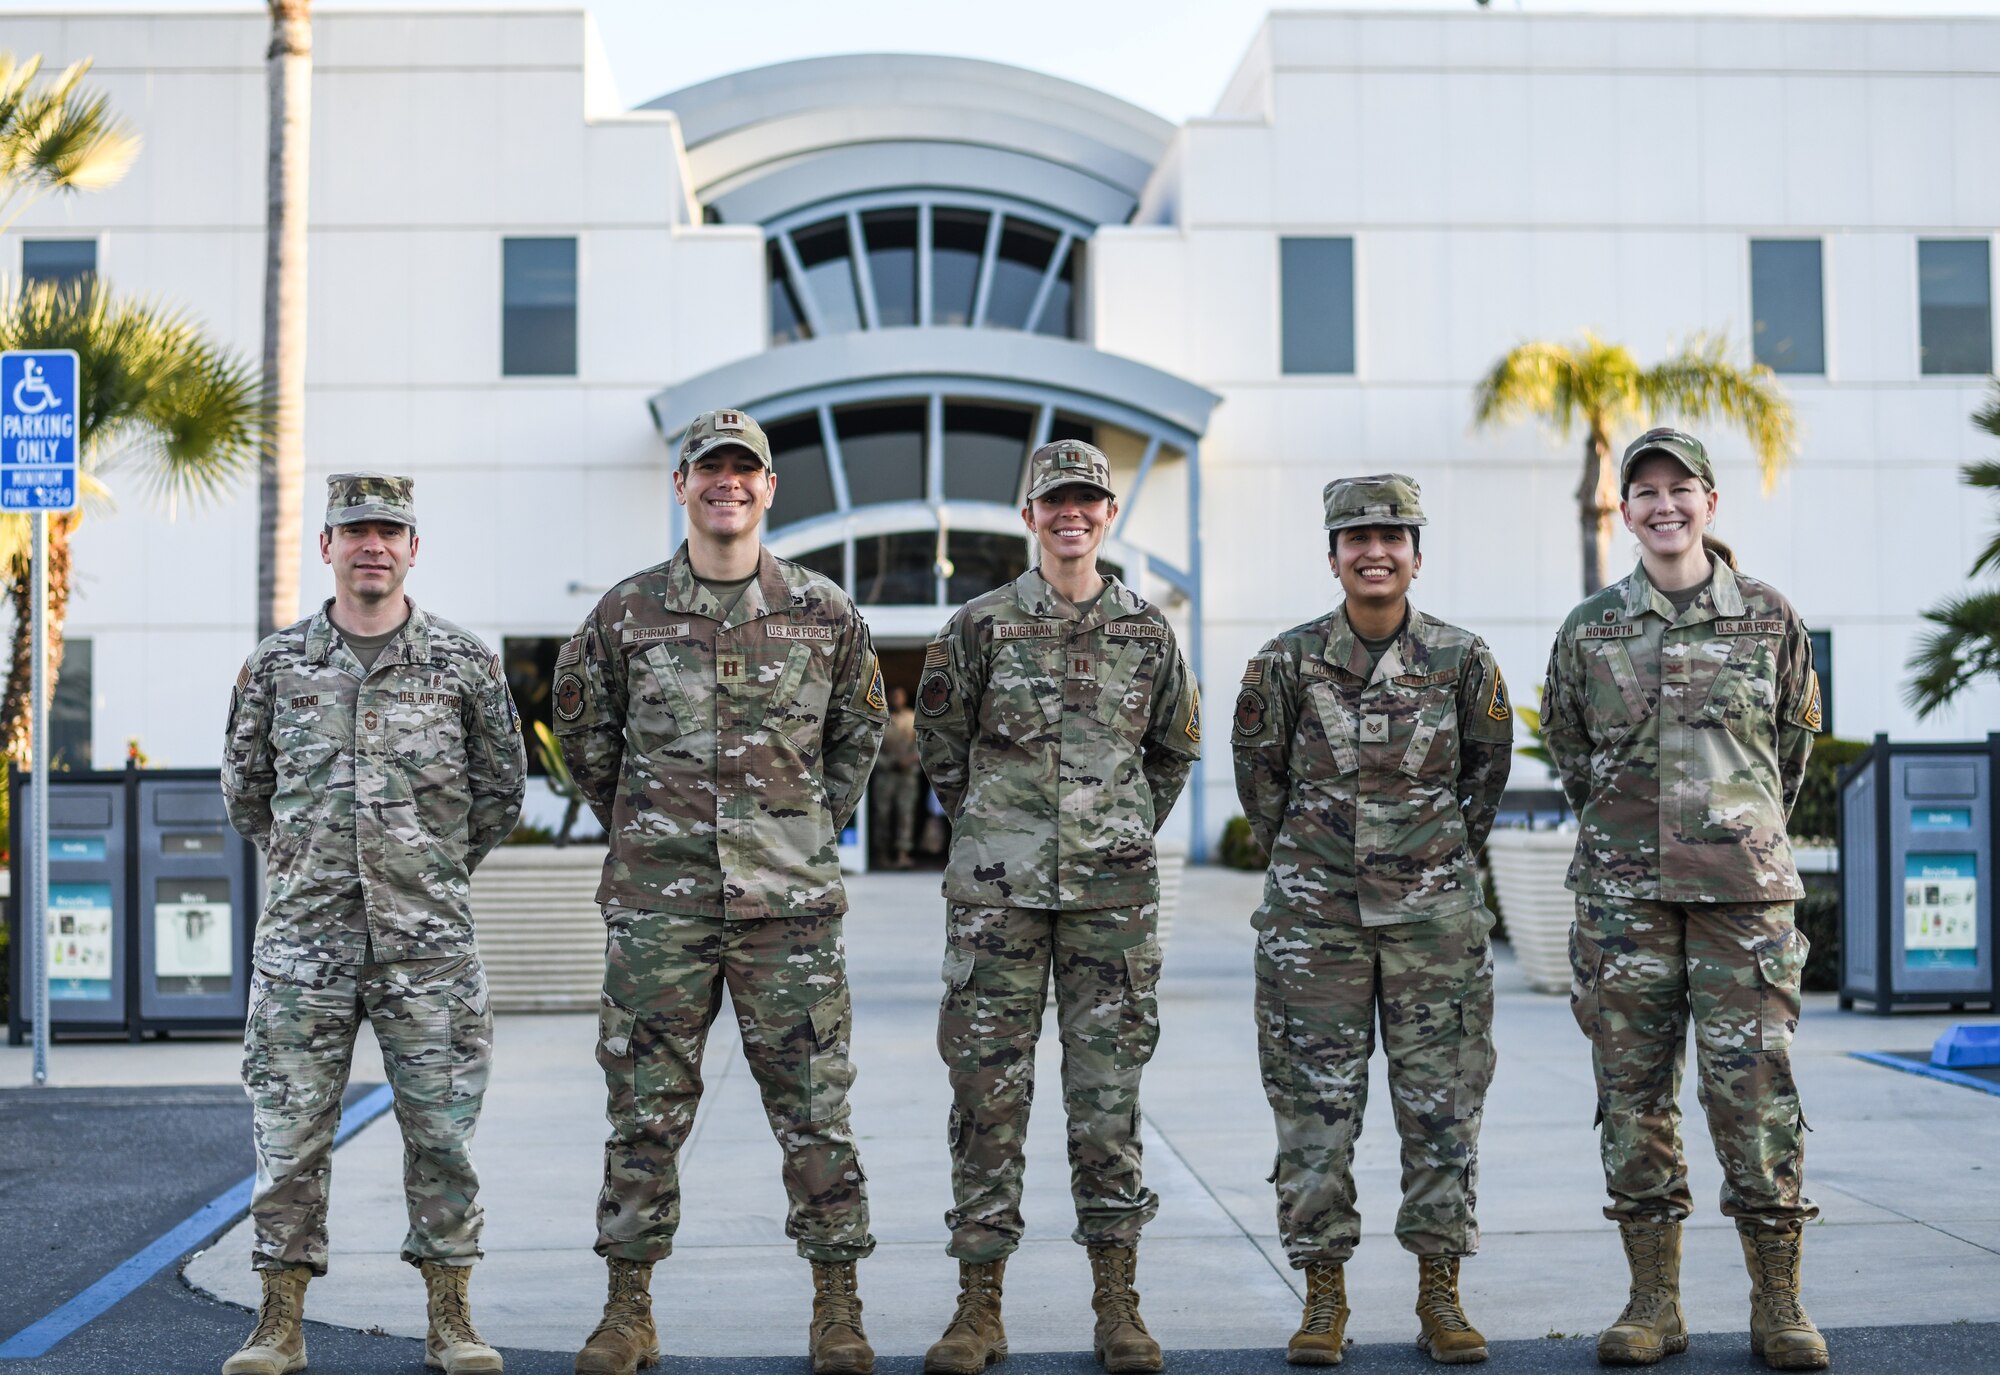 Members of the 61st Medical Squadron on Los Angeles Air Force Base, recently received medals for life-saving assistance provided while off-duty in the community.